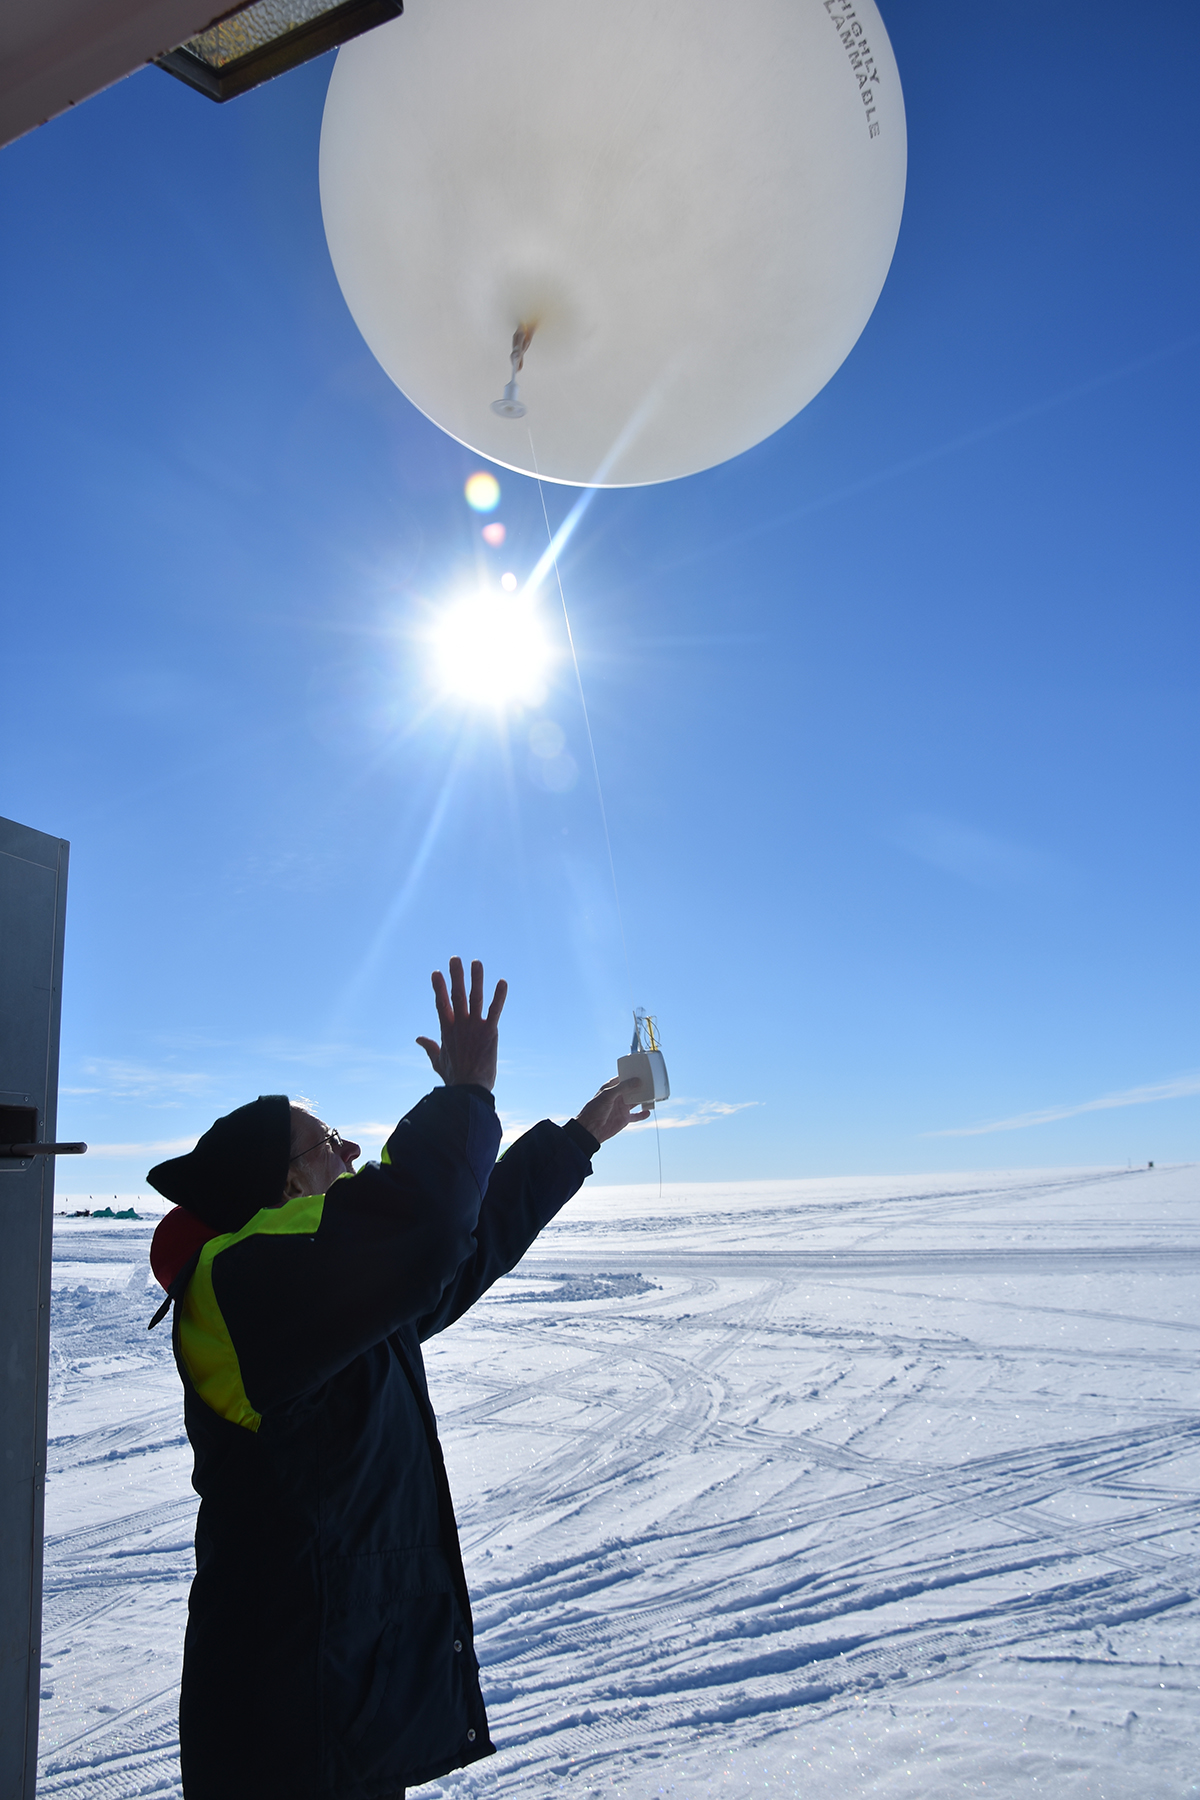 Launching a weather balloon.